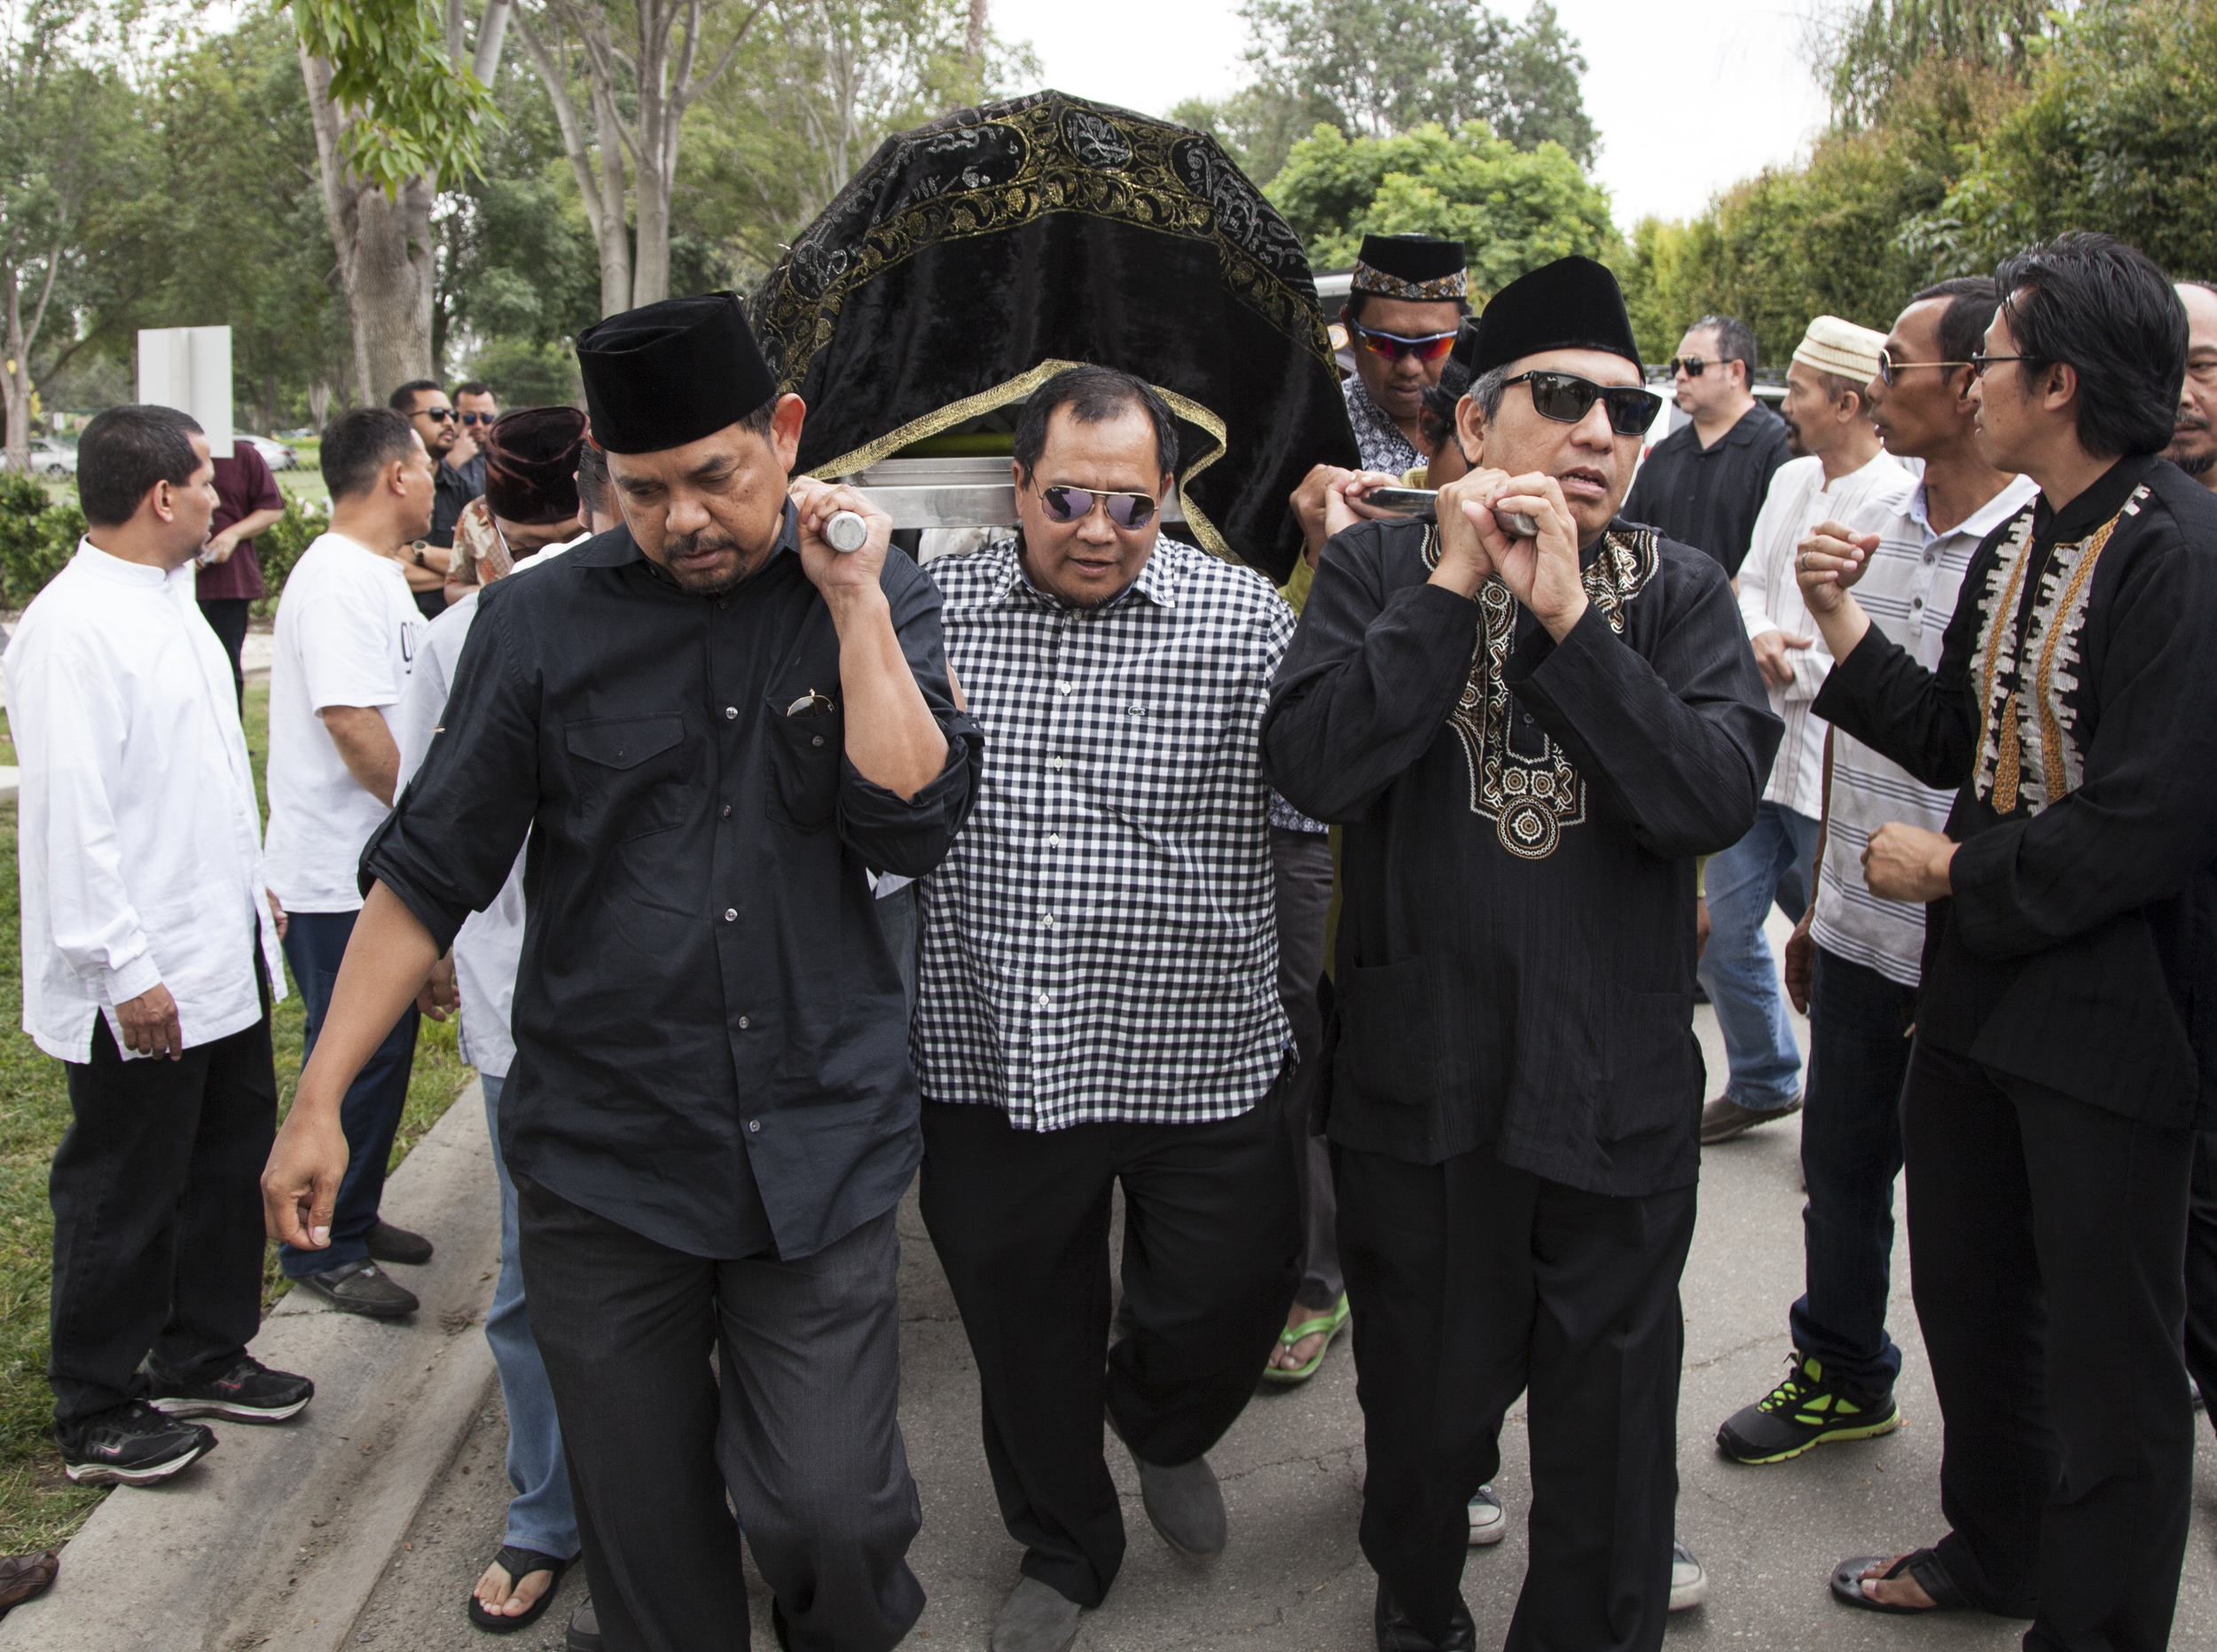  Friends of my father help carry his body to his final resting place in Garden Grove, Calif. on&nbsp;Saturday, June 27, 2015. 